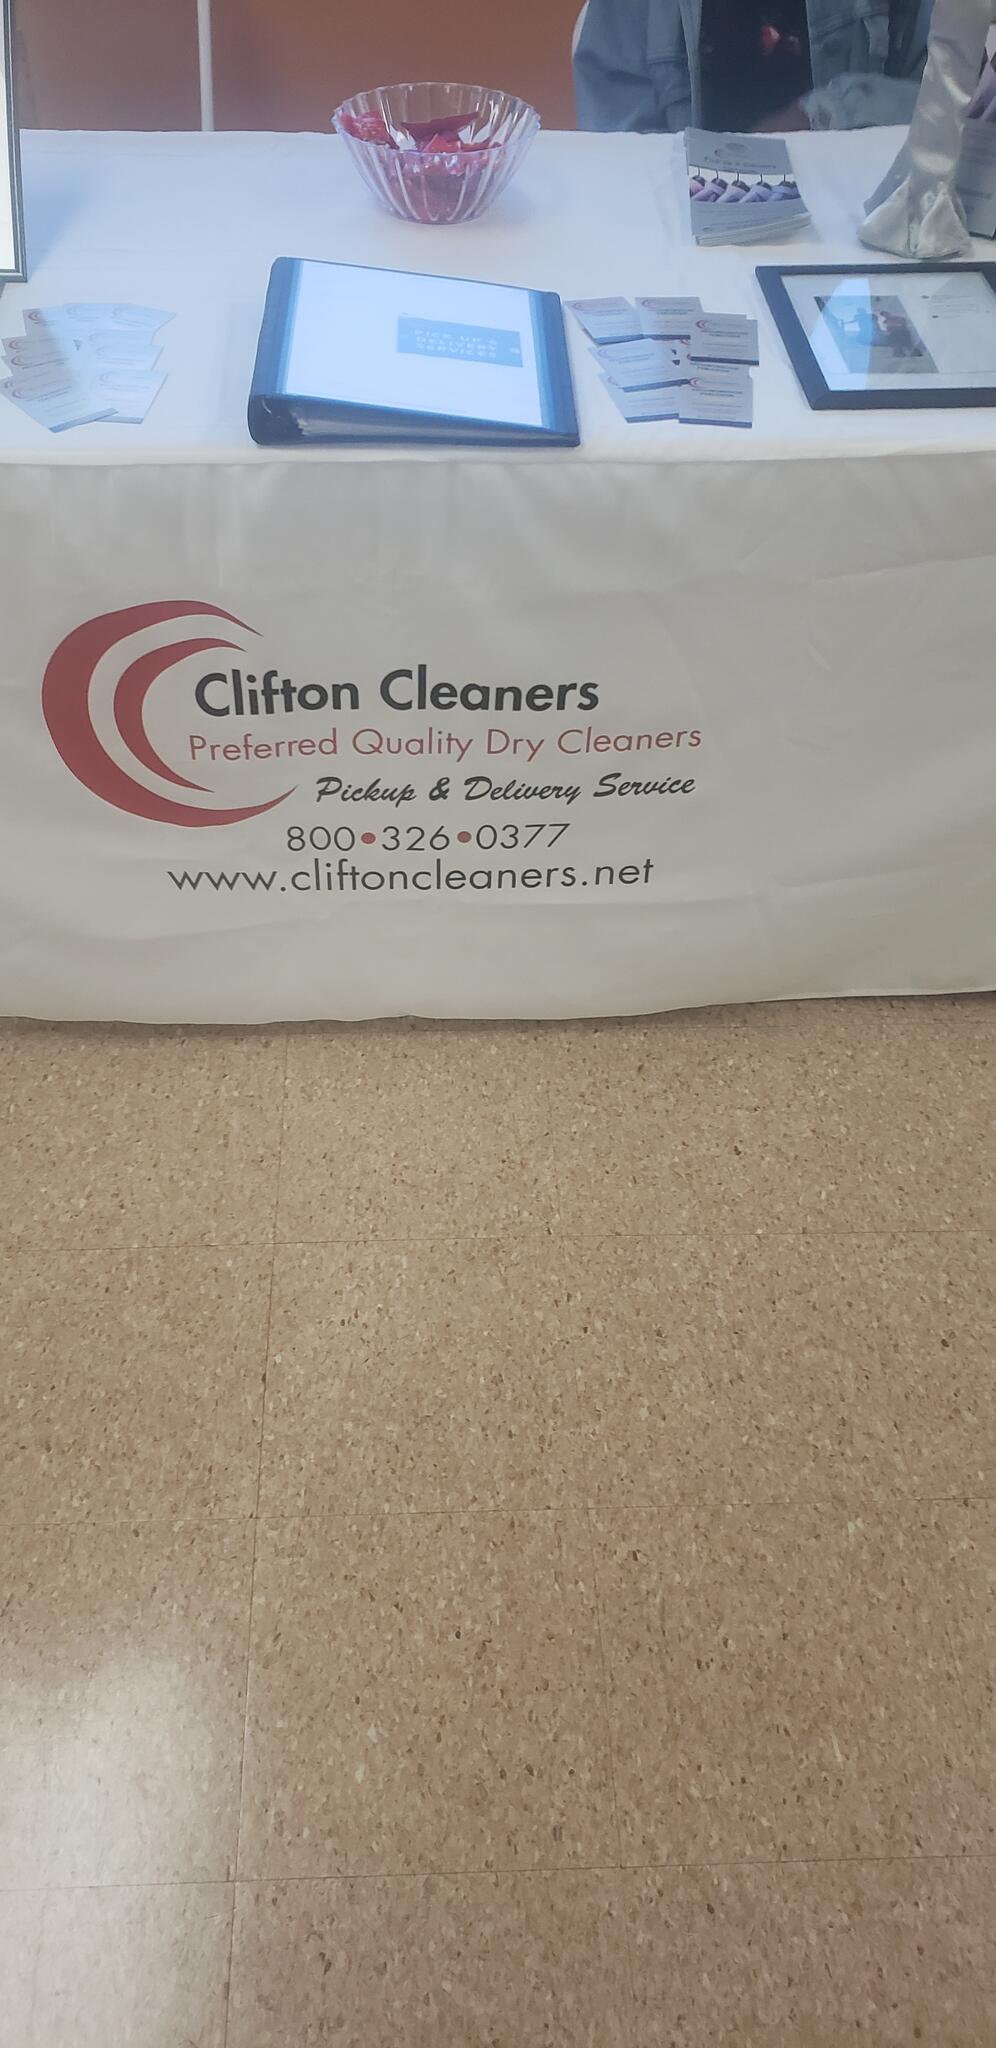 Clifton Cleaners Port Town Rd, Accokeek Maryland 20607